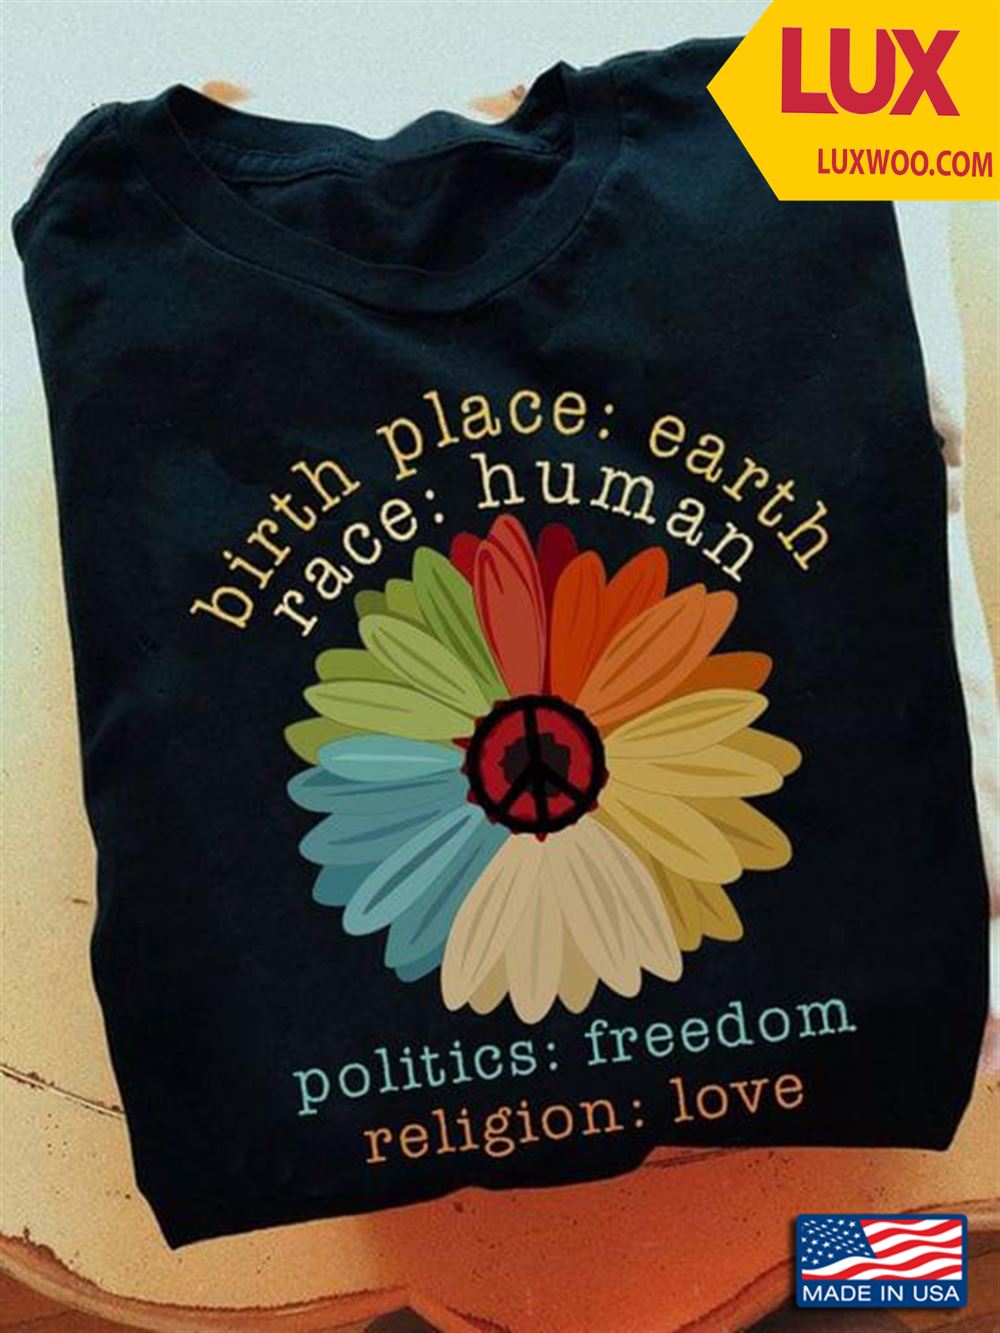 Birth Place Earth Race Human Politics Freedom Religion Love Tshirt Size Up To 5xl